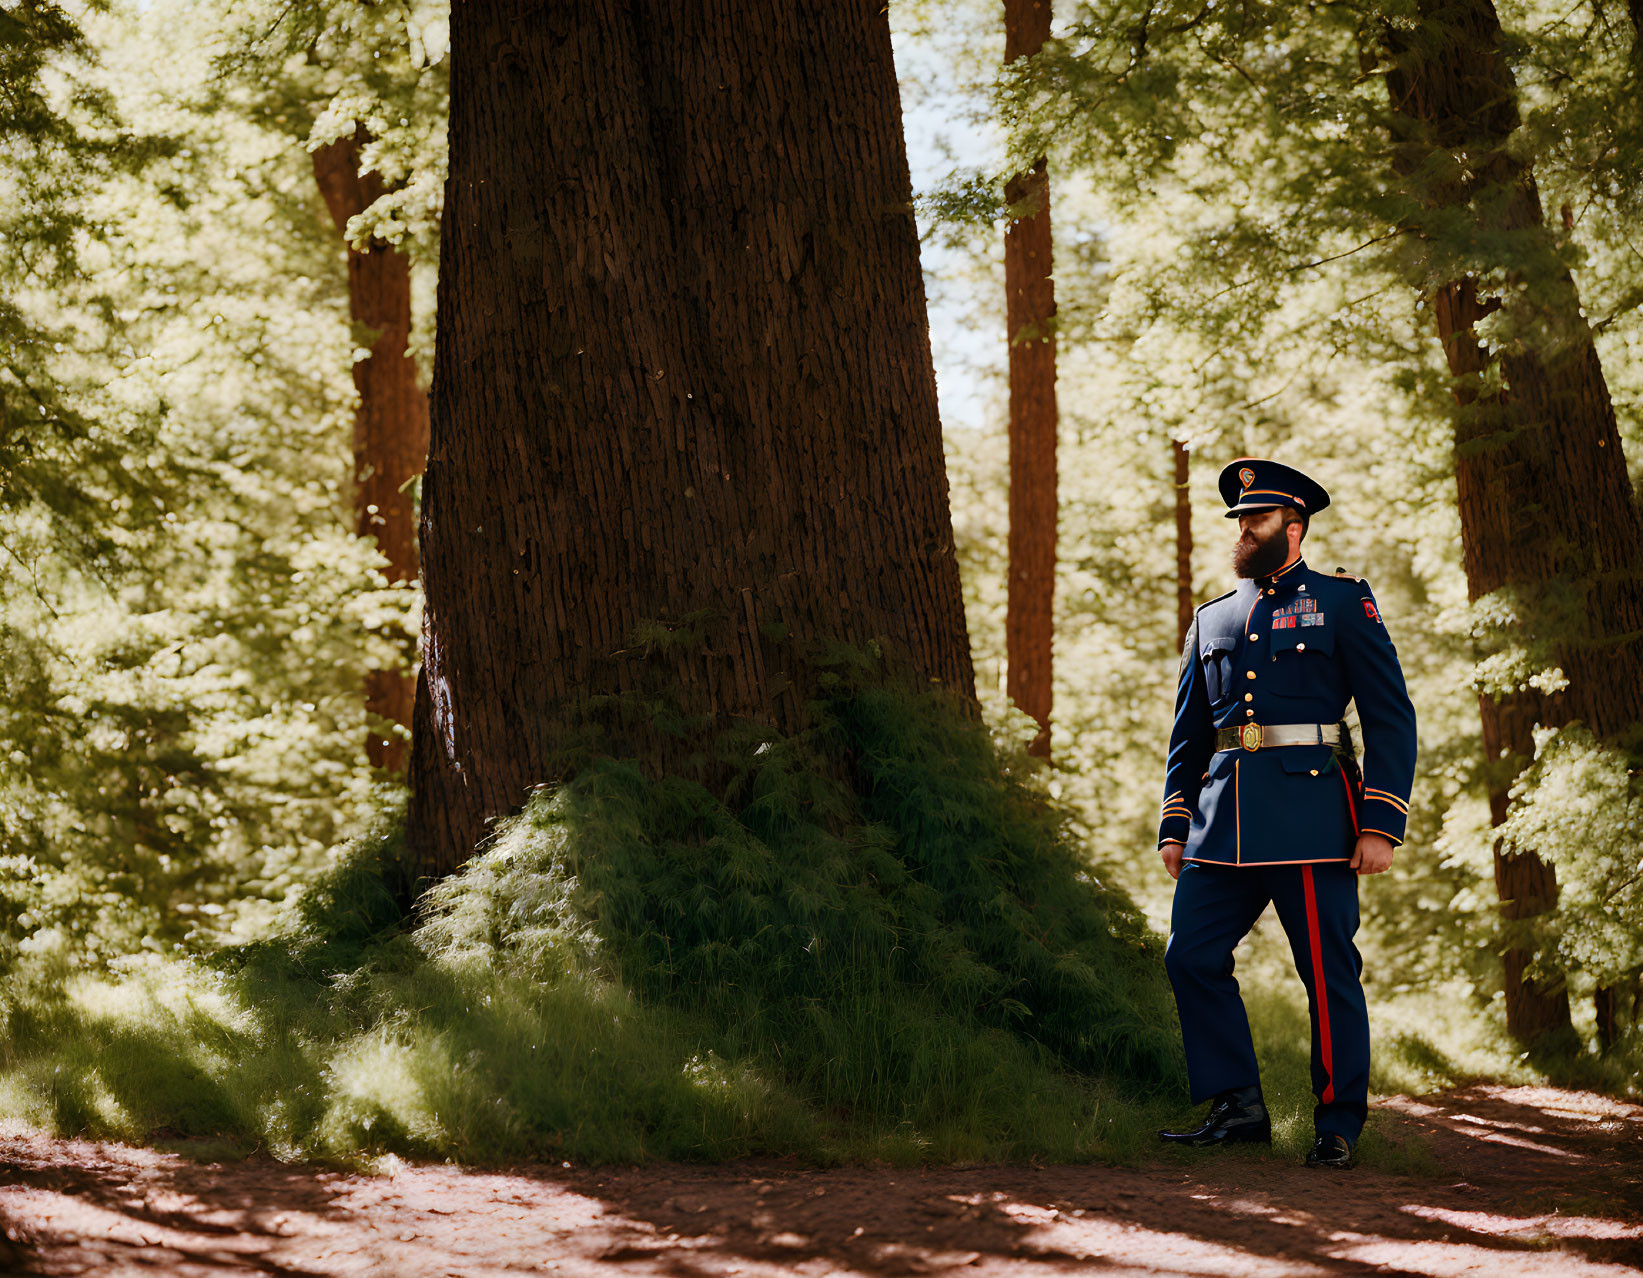 Uniformed person in forest with sunlight filtering through trees